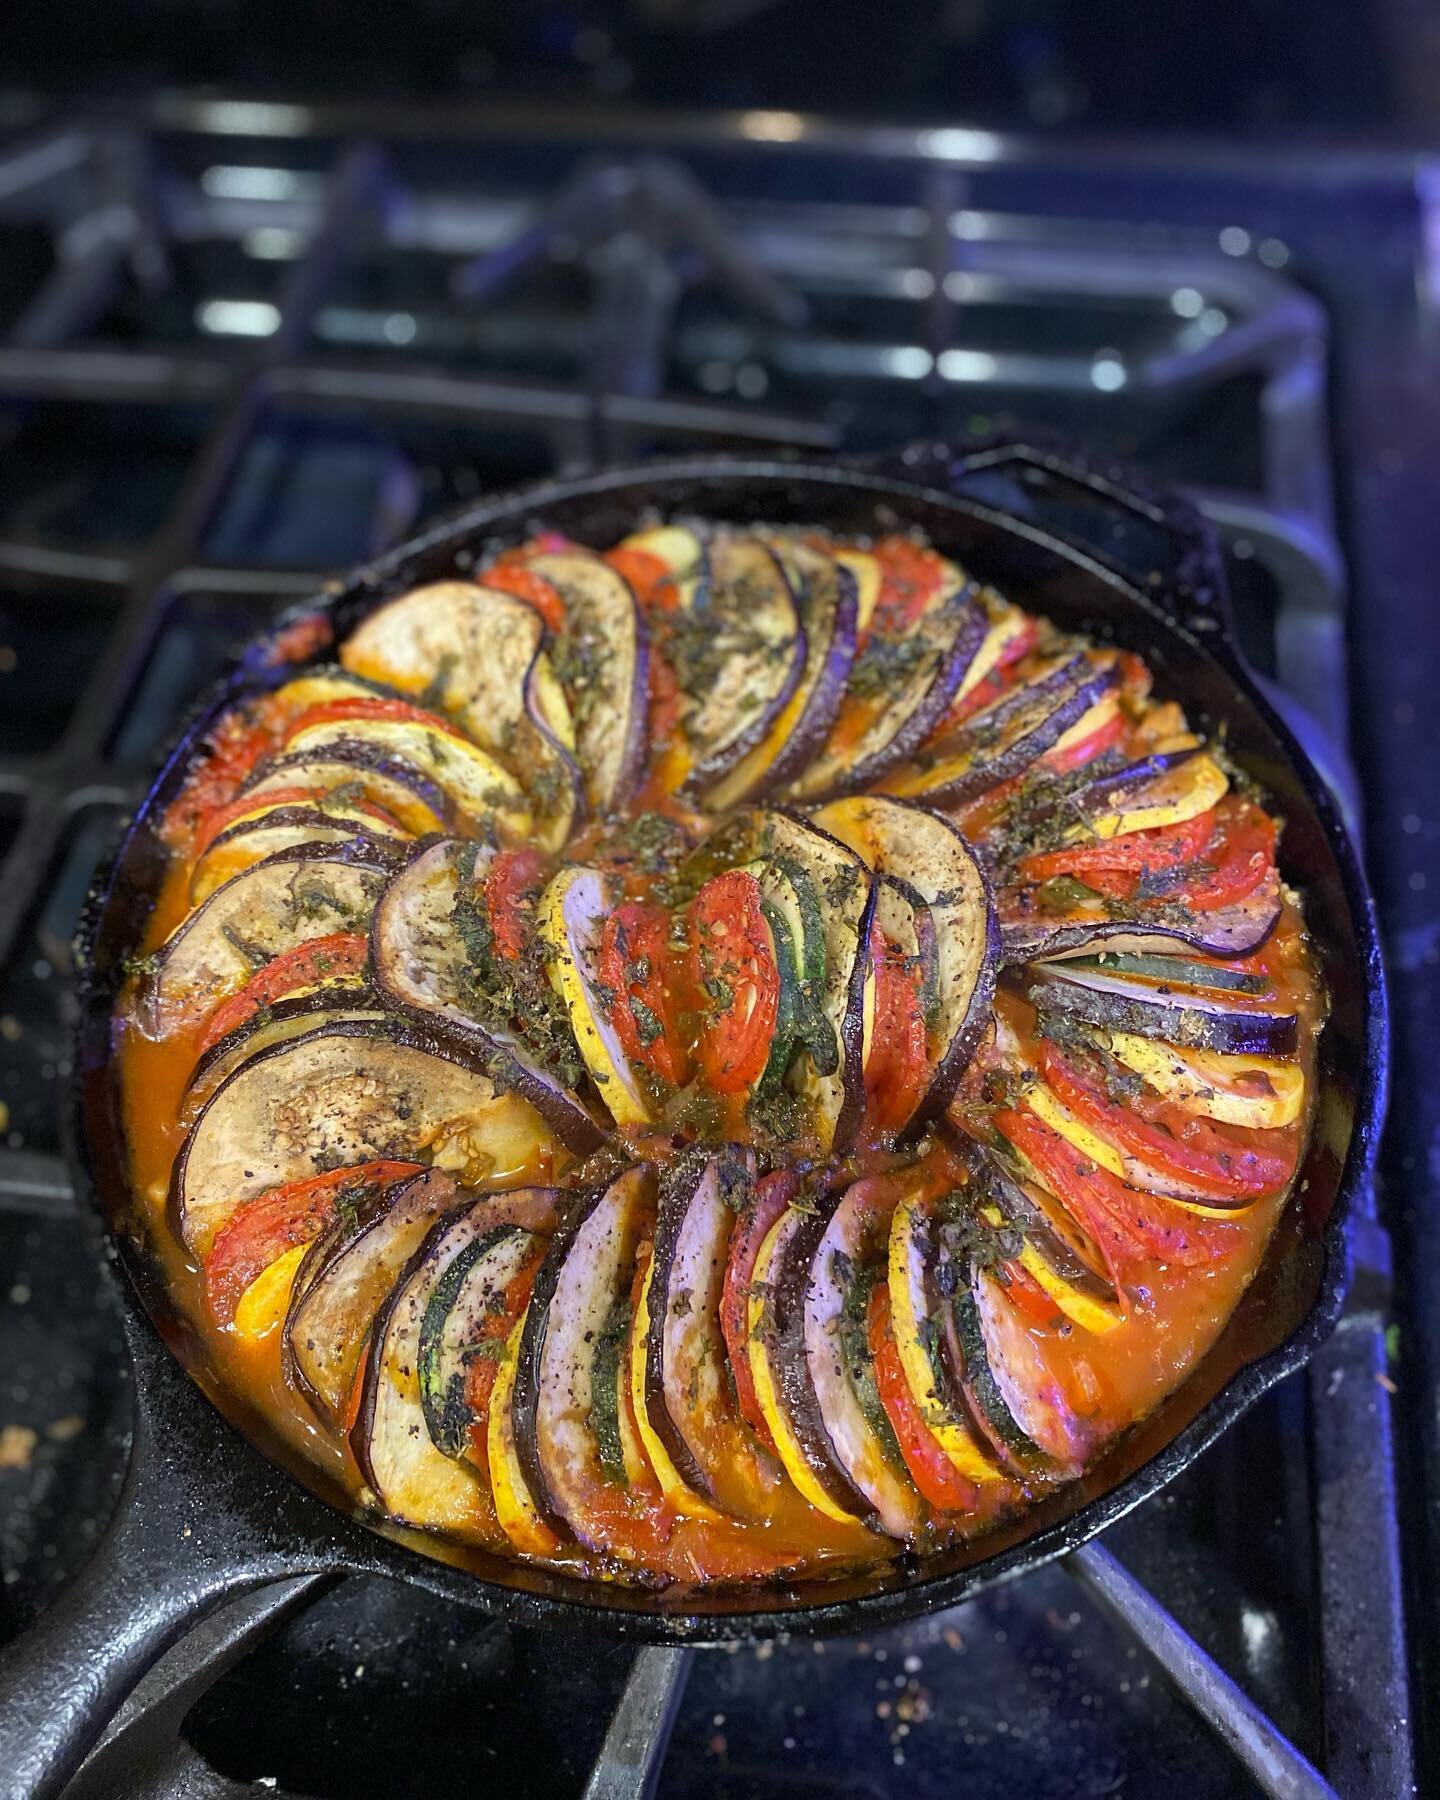 ..When you haven&rsquo;t made one of your favorite recipes in a long time&hellip; you go all out!!! I surprised myself with this one. 

Ratatouille as a main or side is always a great choice, and I had to do it while yellow squash and zucchini were s